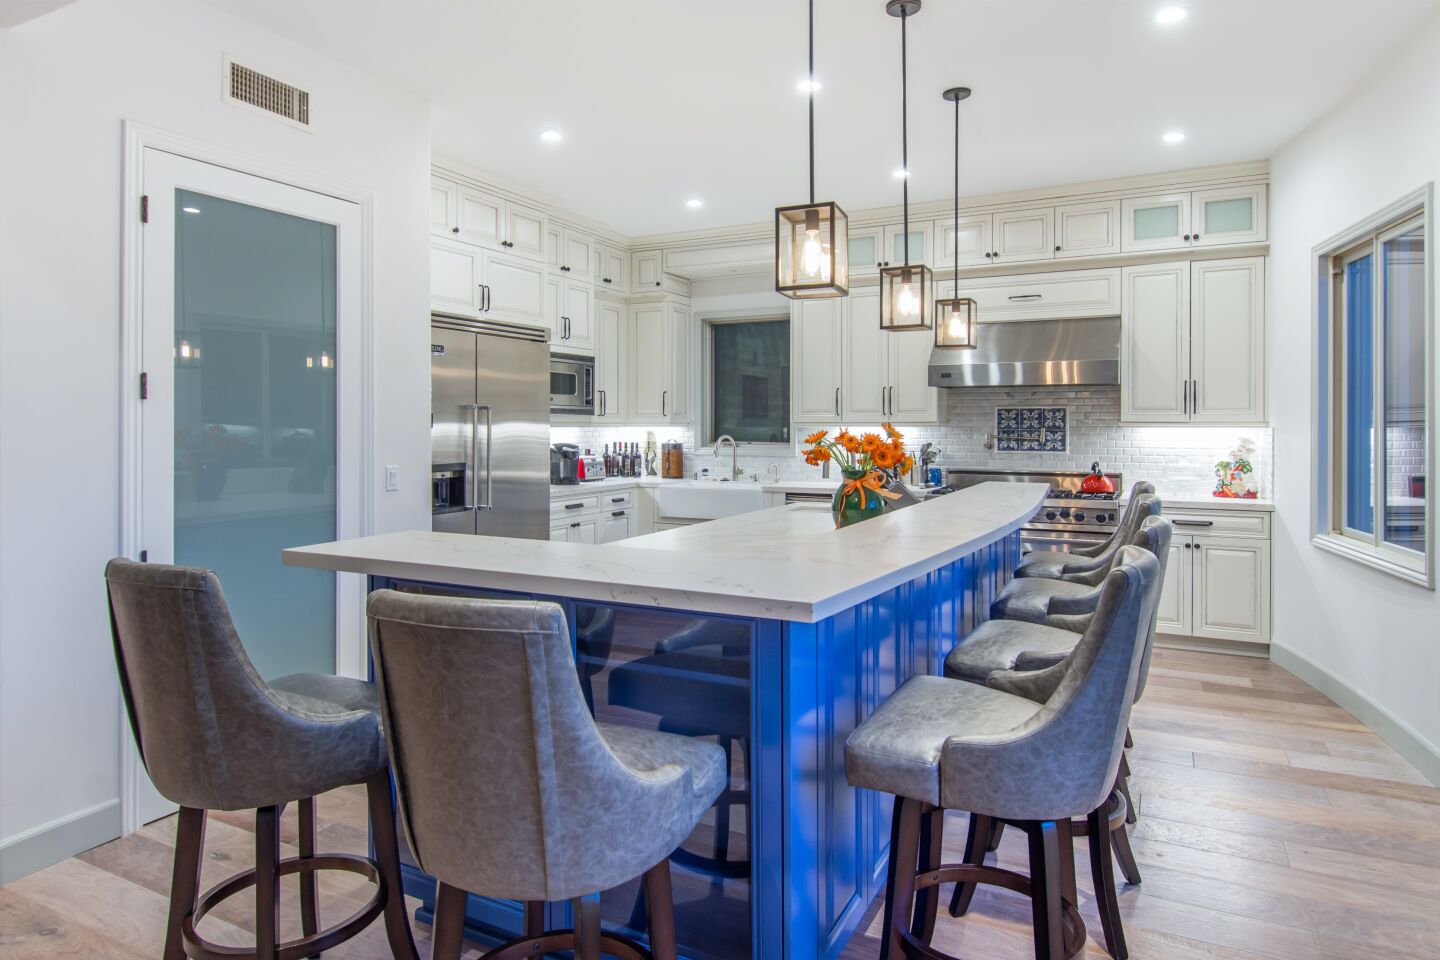 There's seating for six around the bright blue kitchen island.